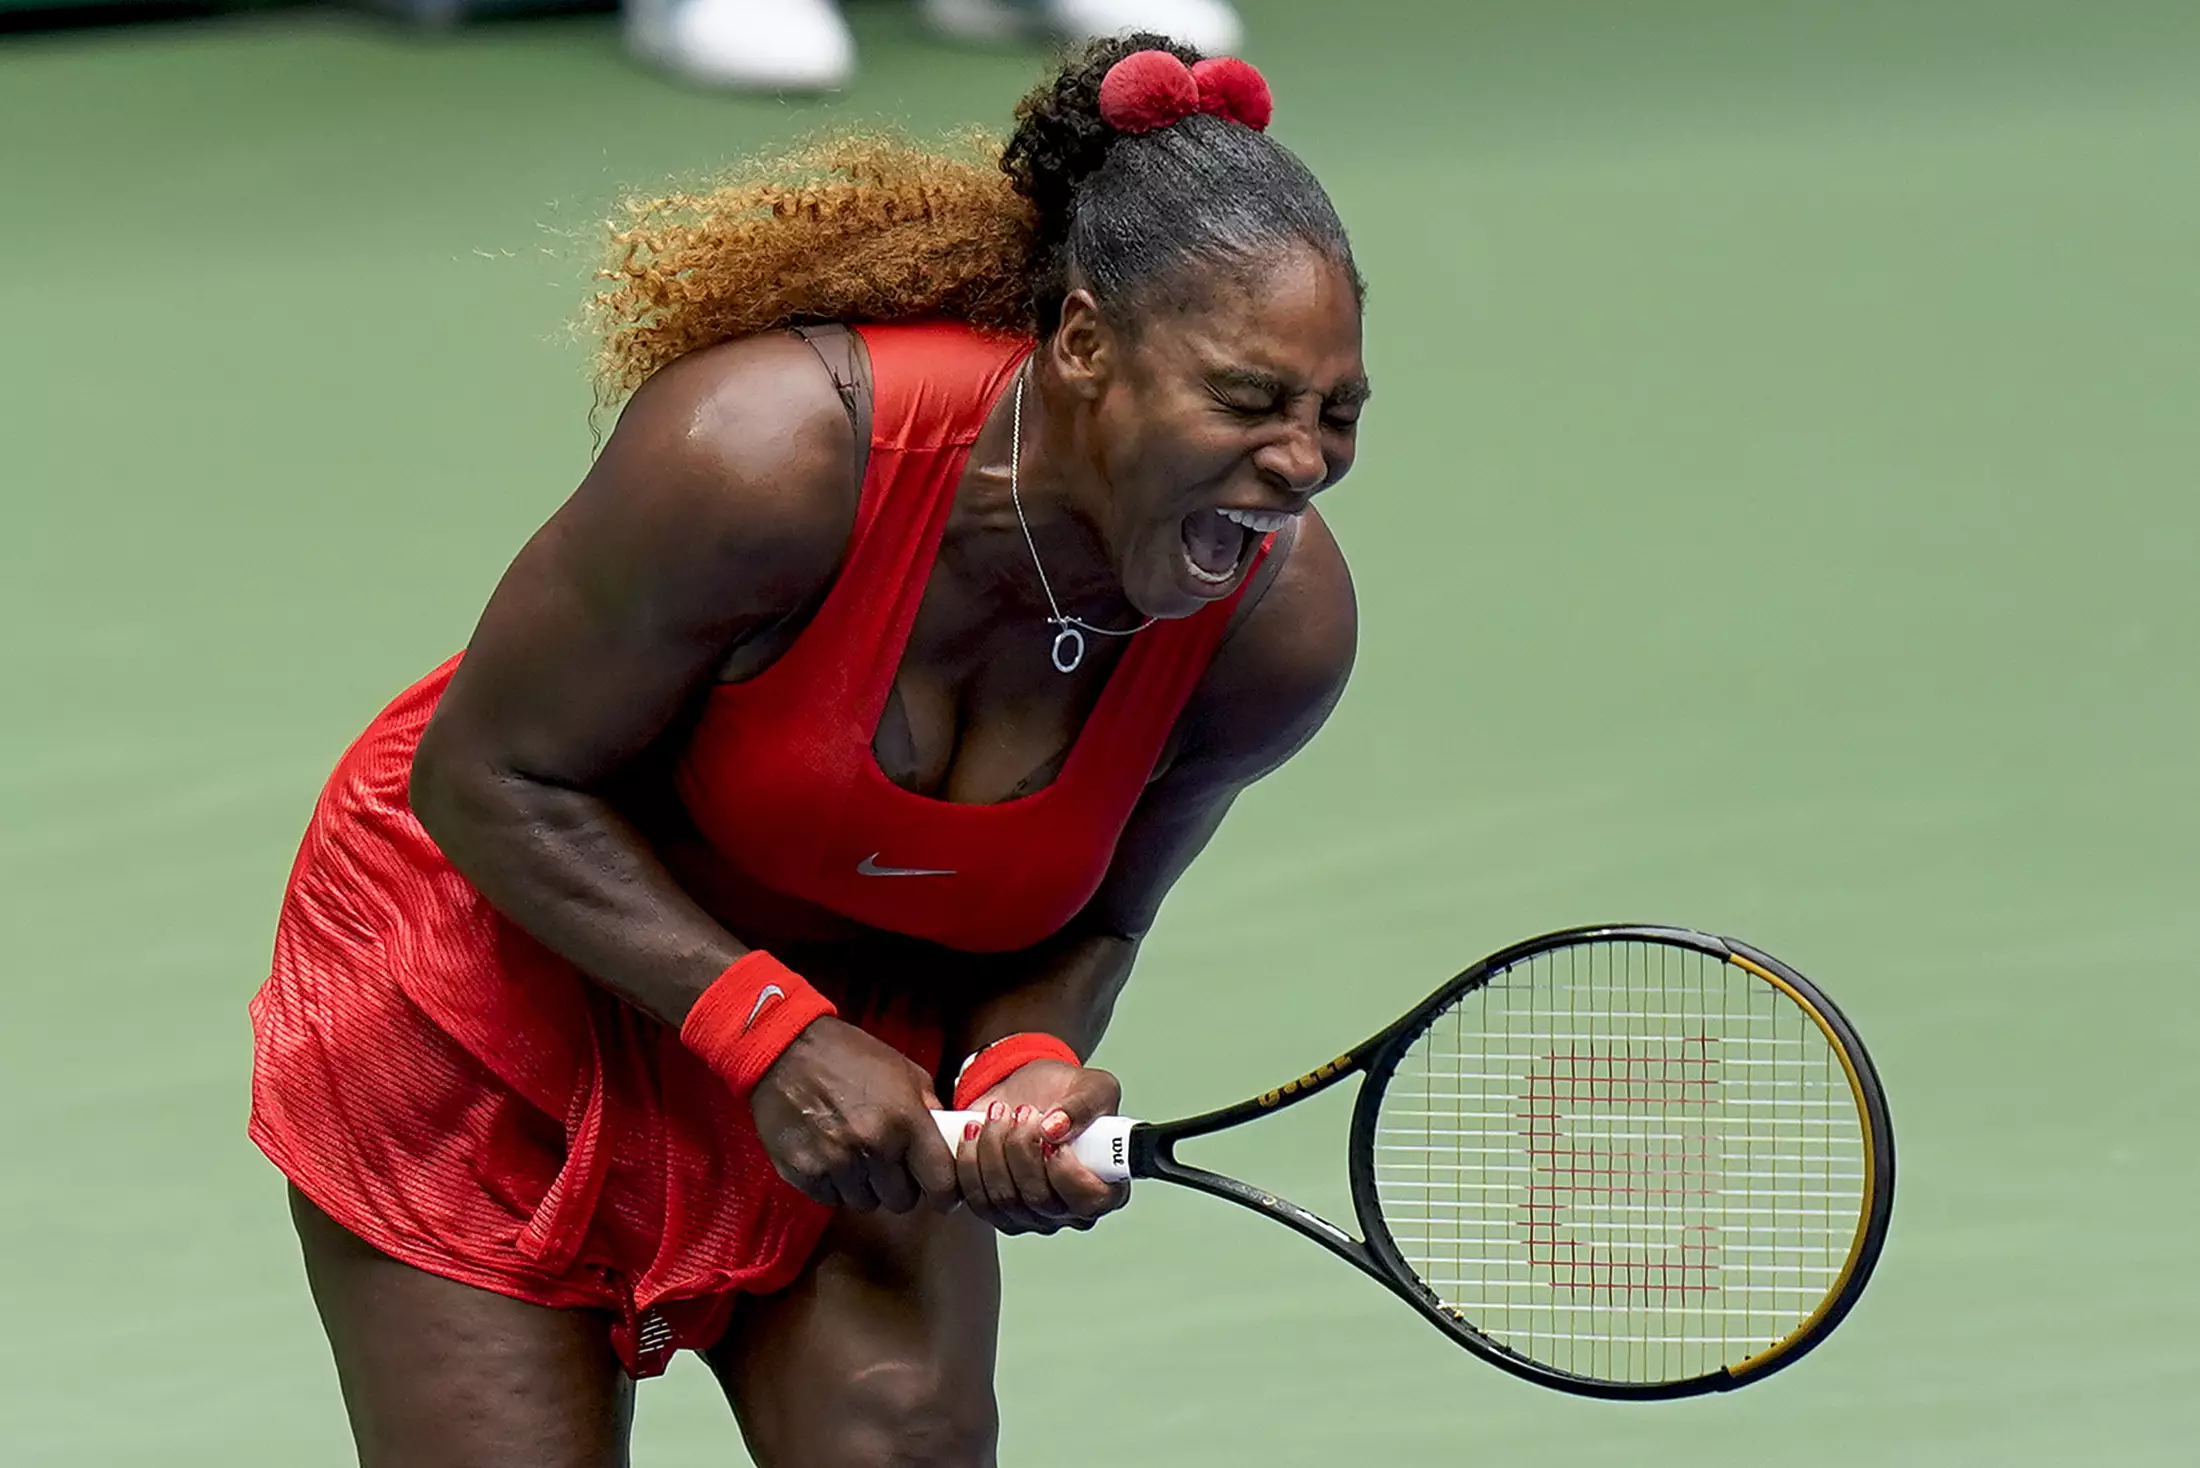 Tennis icon Serena Williams put on another amazing display.